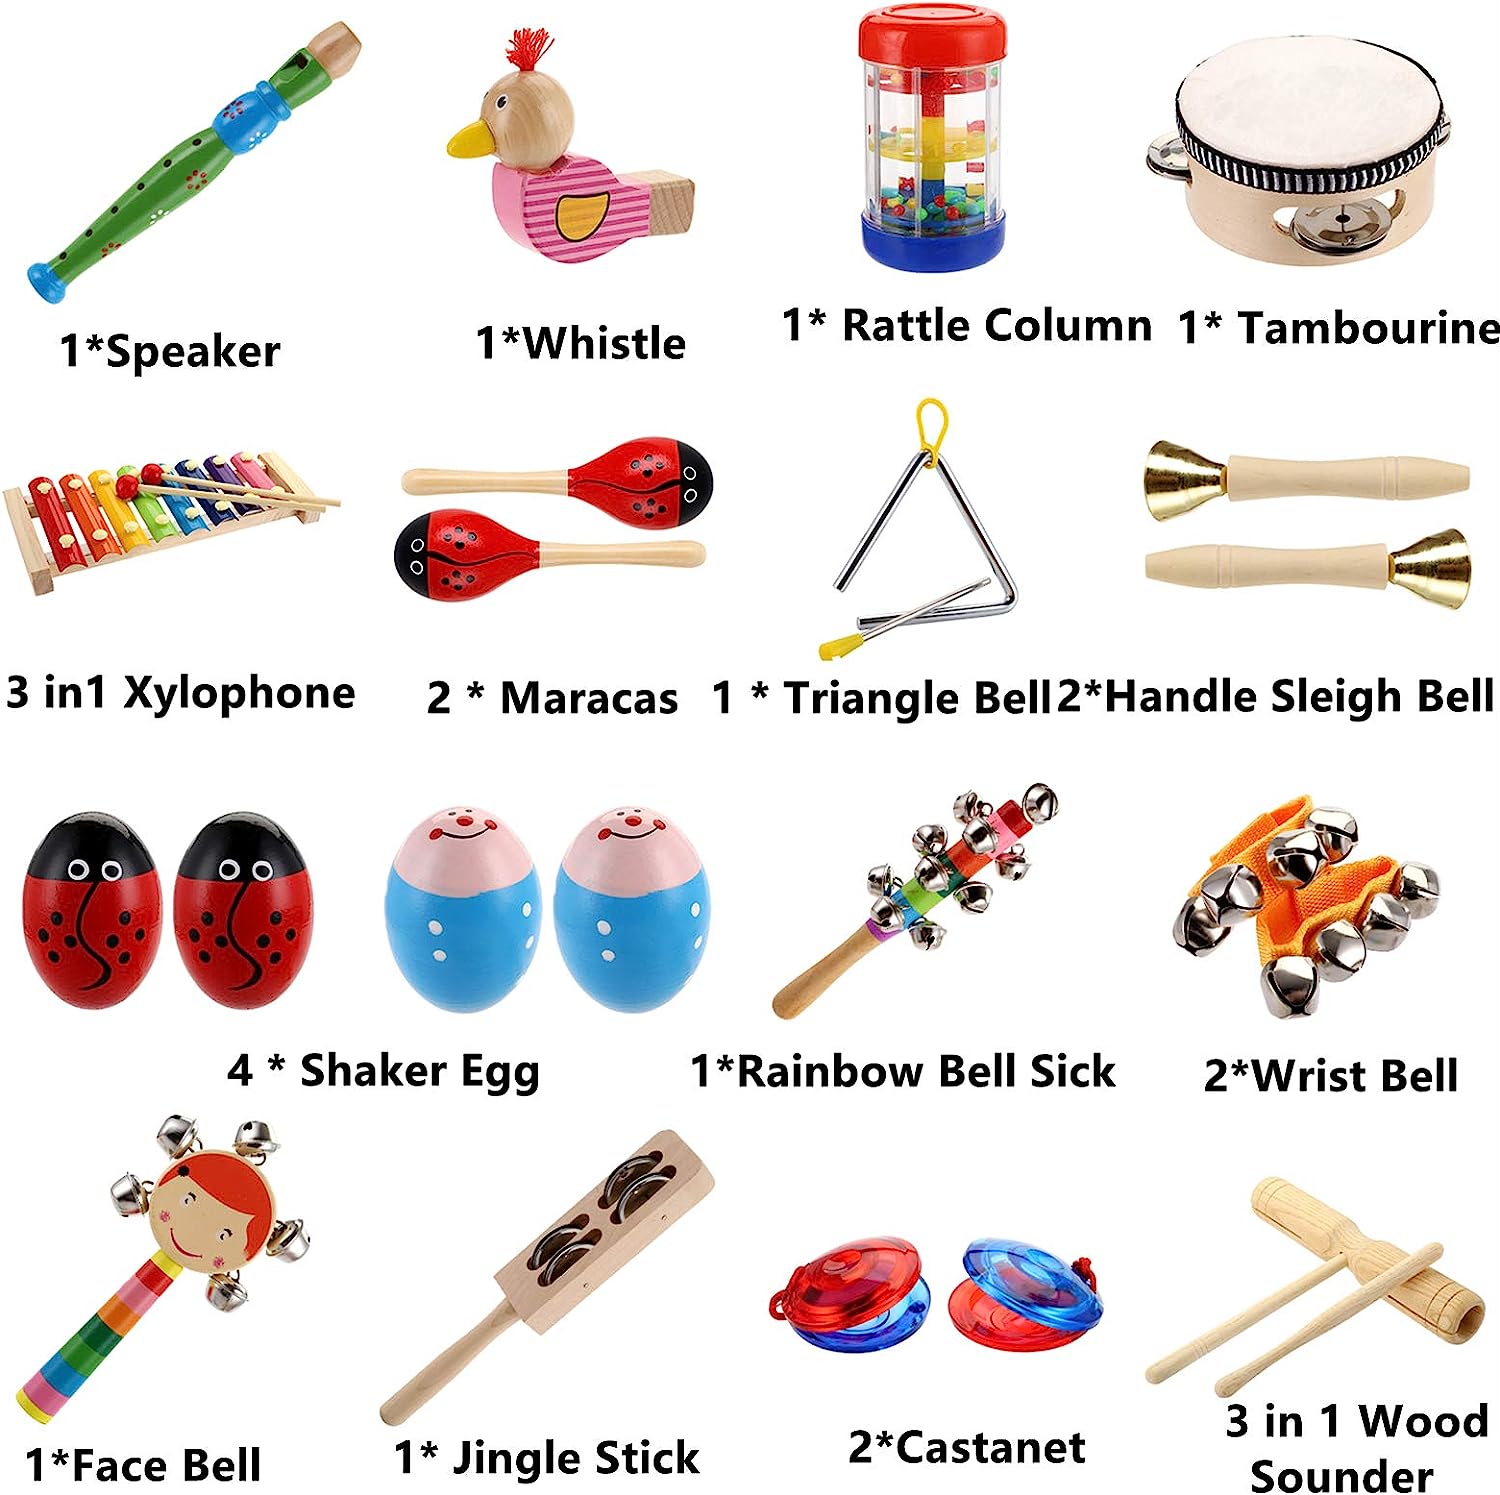 Toddler Musical Instruments, Kids Wooden Percussion Instruments Toys, Baby Rhythm Music Education Toys Set for Preschool Educational Early Learning, Boys and Girls with Storage Bag